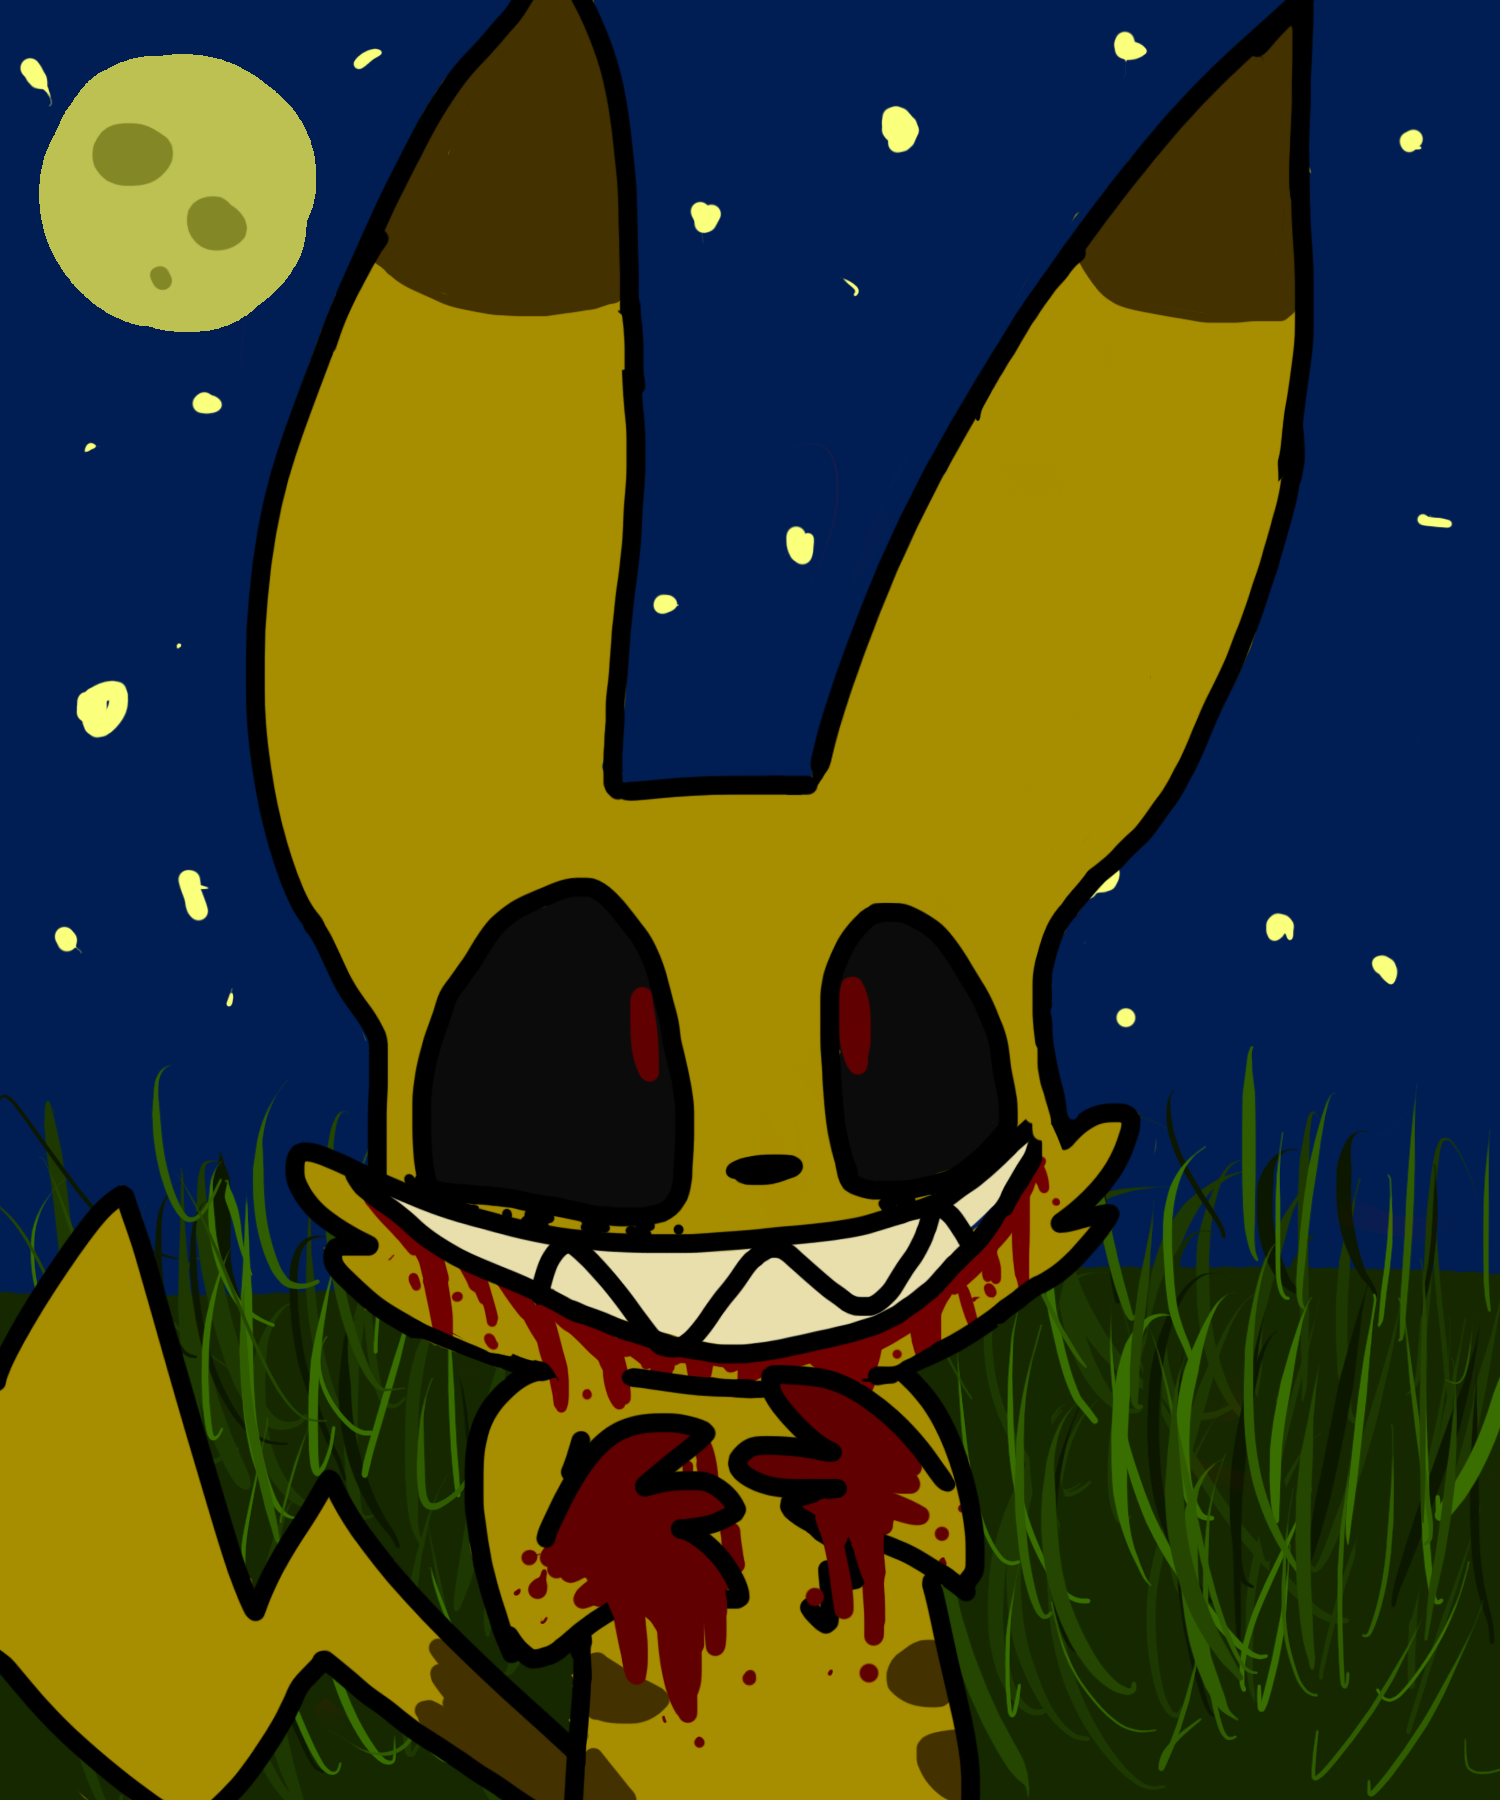 uhcakip/pikachu.exe by Cre3psdoesthings on DeviantArt.